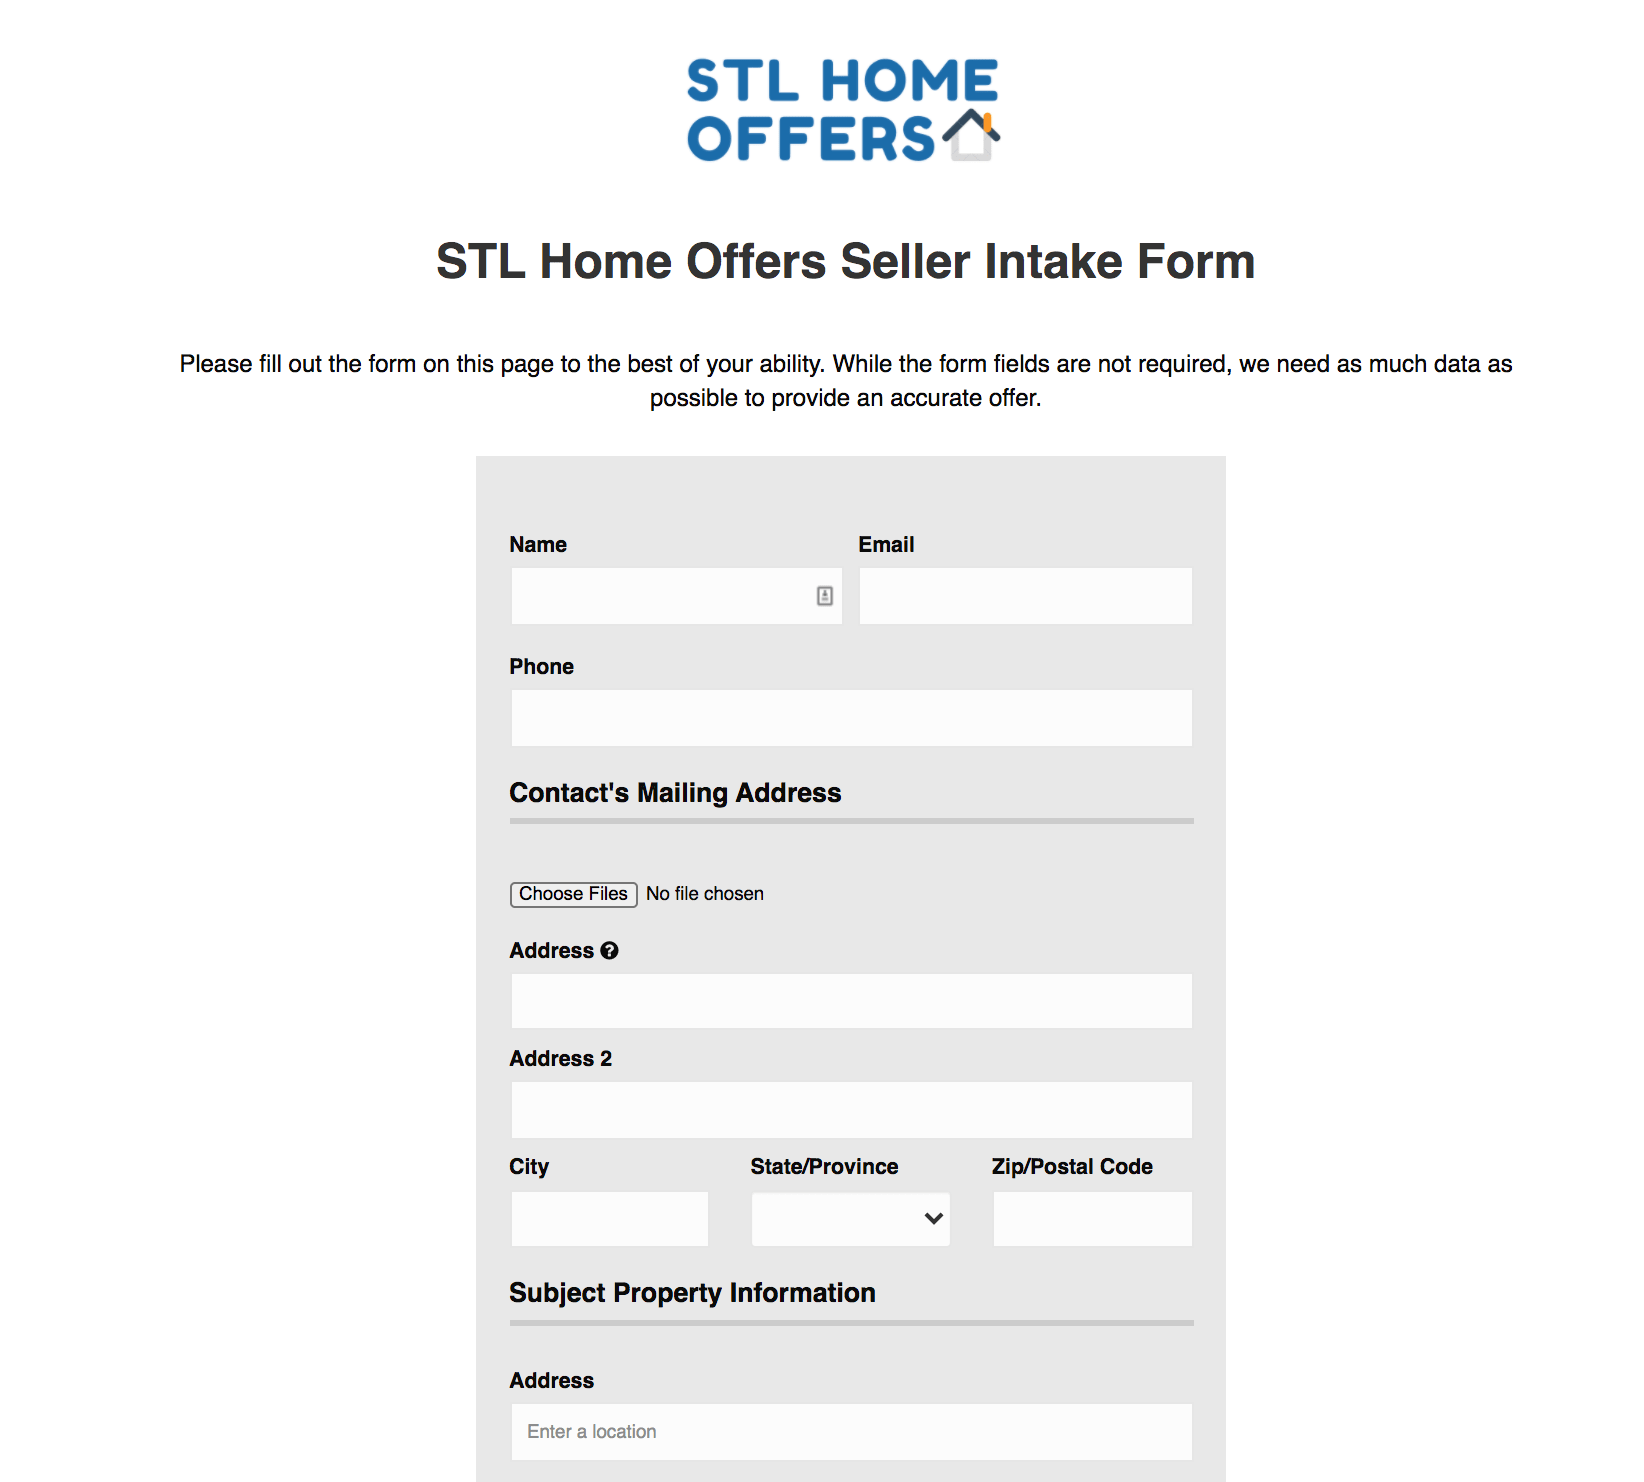 Example intake form you can give a call answering service